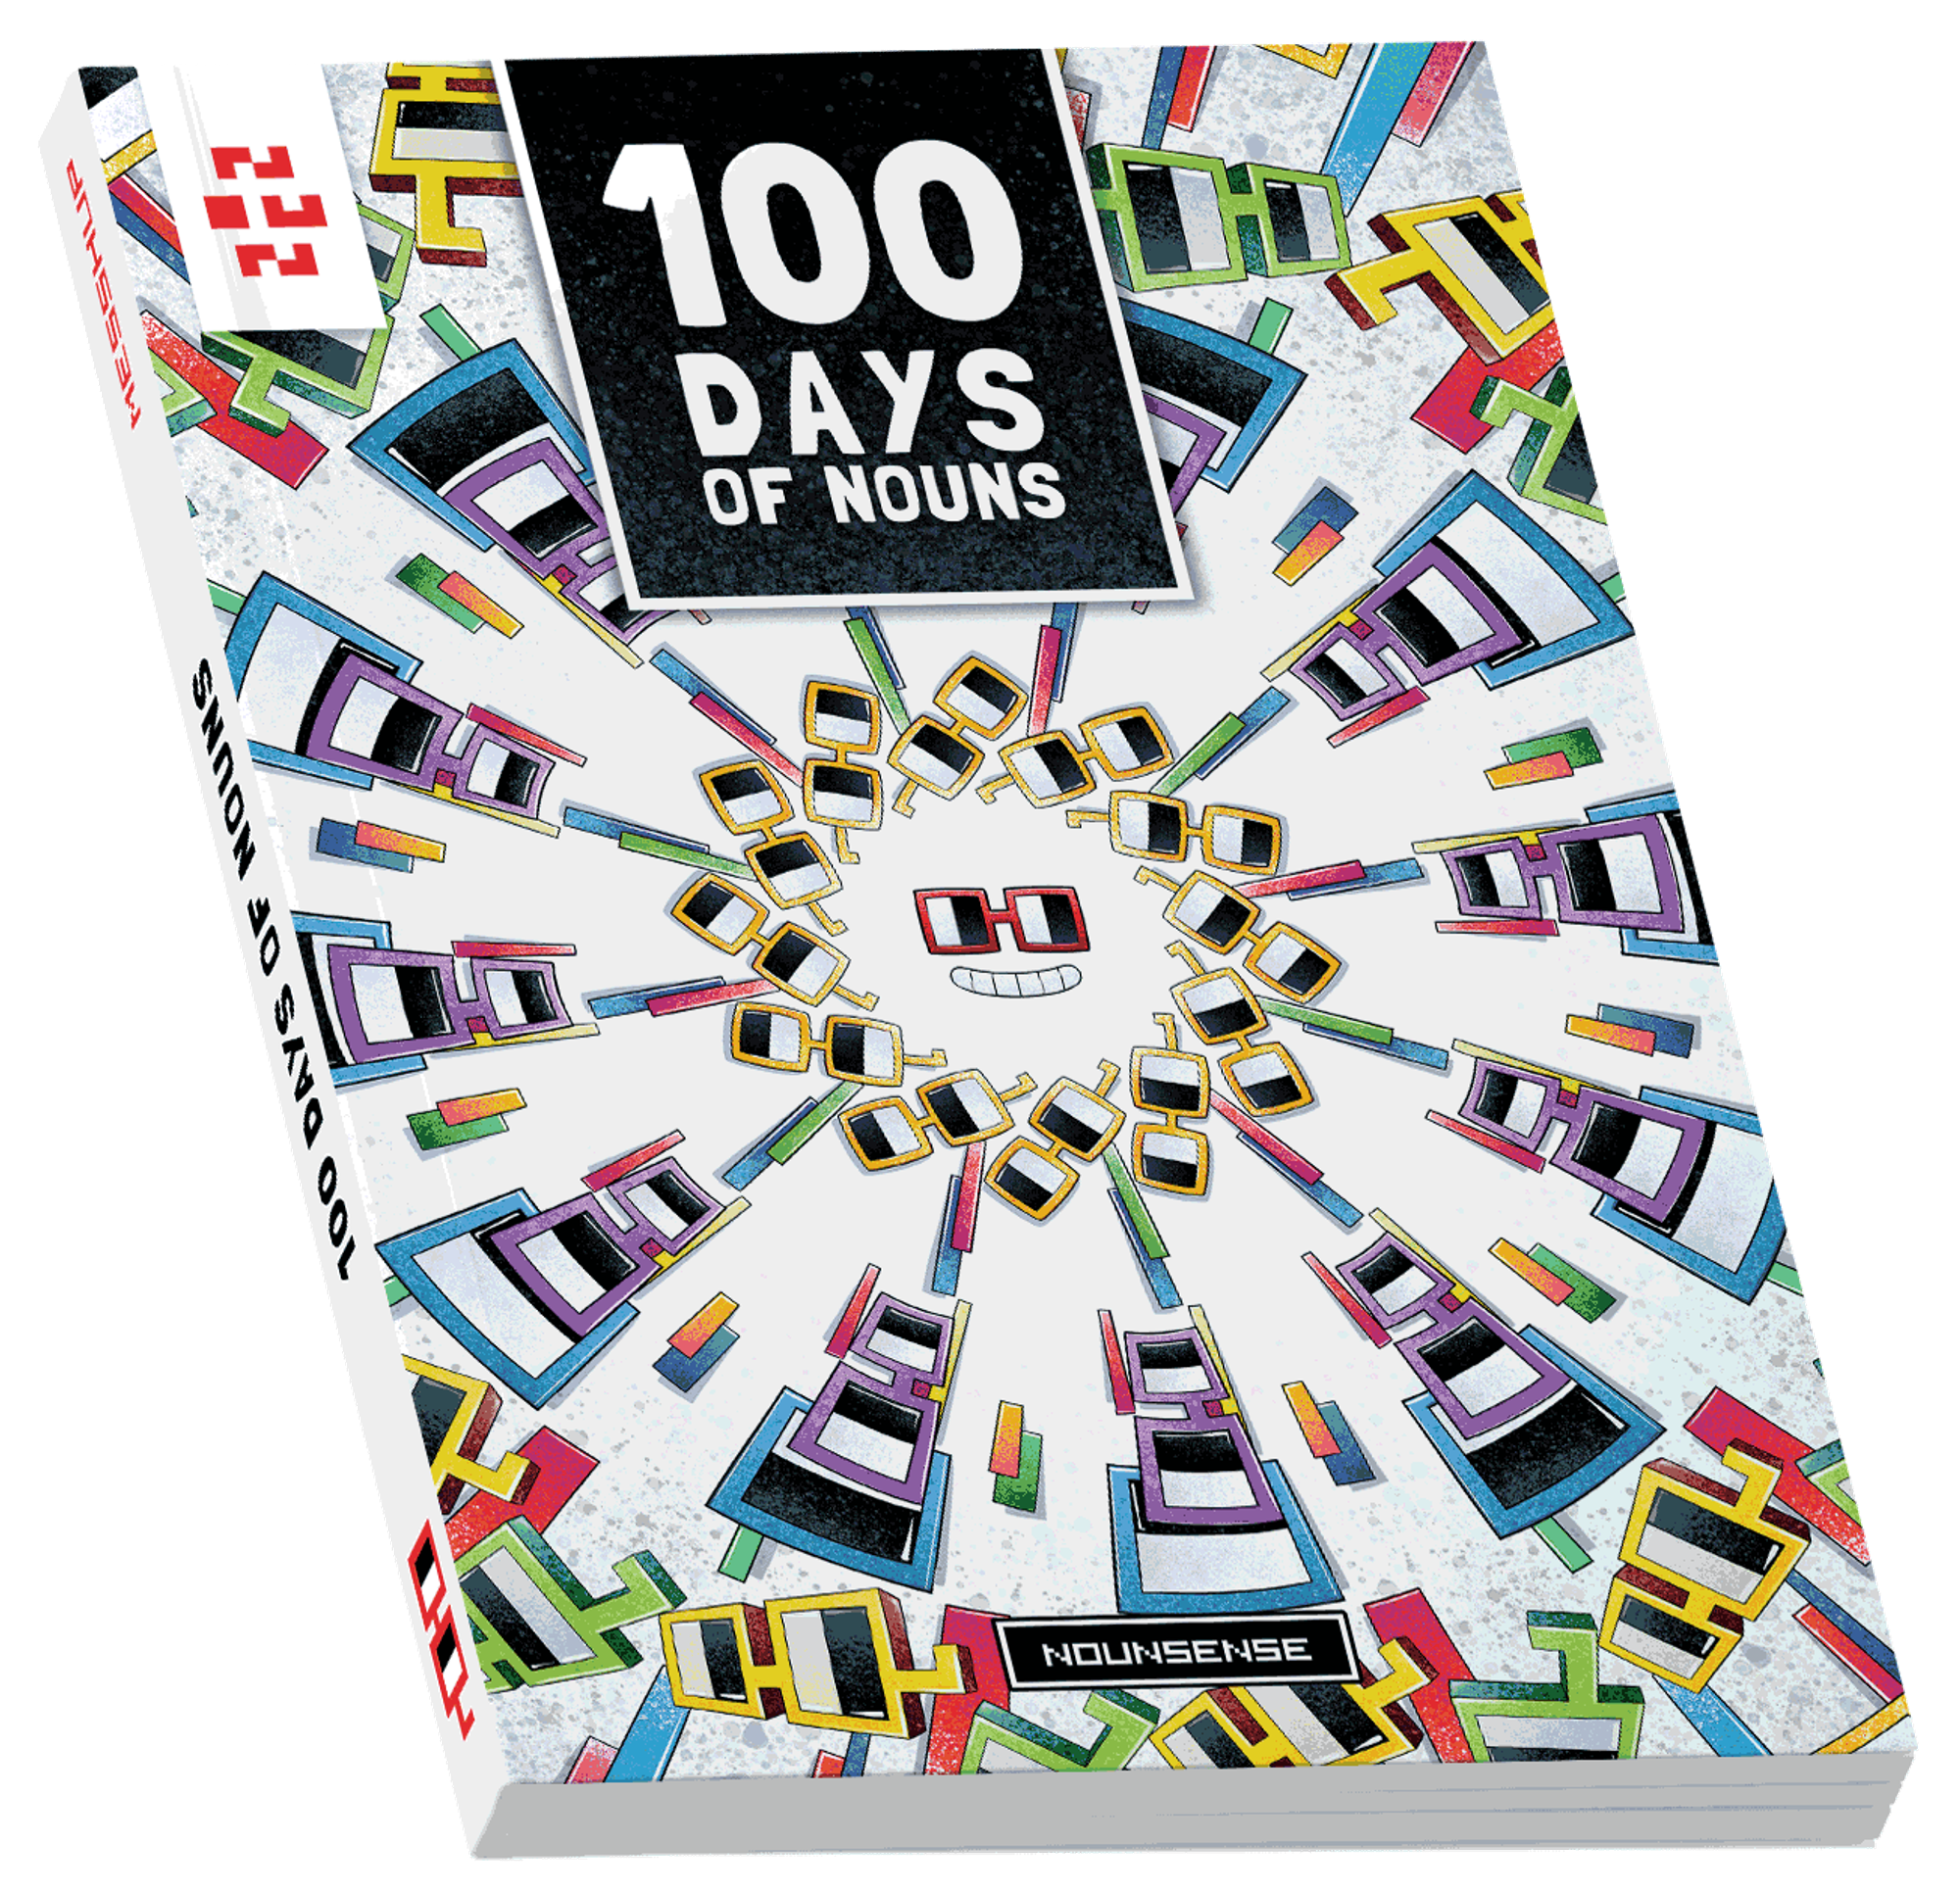 100-DAYS-OF-NOUNS-by-MESSHUP.png